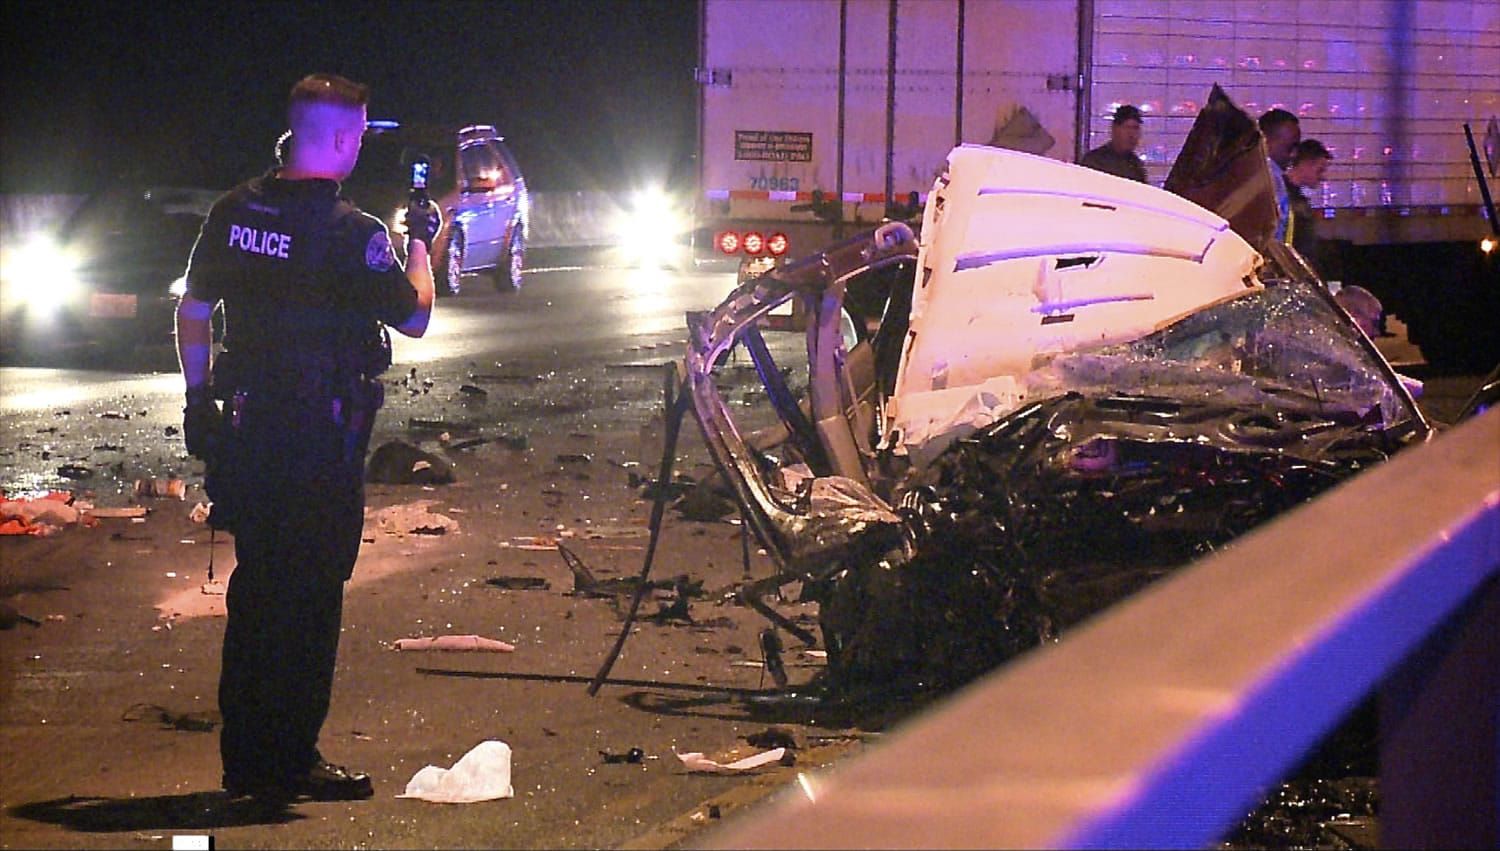 A police officer examines the remains of a Vancouver woman's car destroyed by a wrong-way truck, background, on the Interstate 205 bridge. The trucker was arrested; the car's driver had only minor injuries.